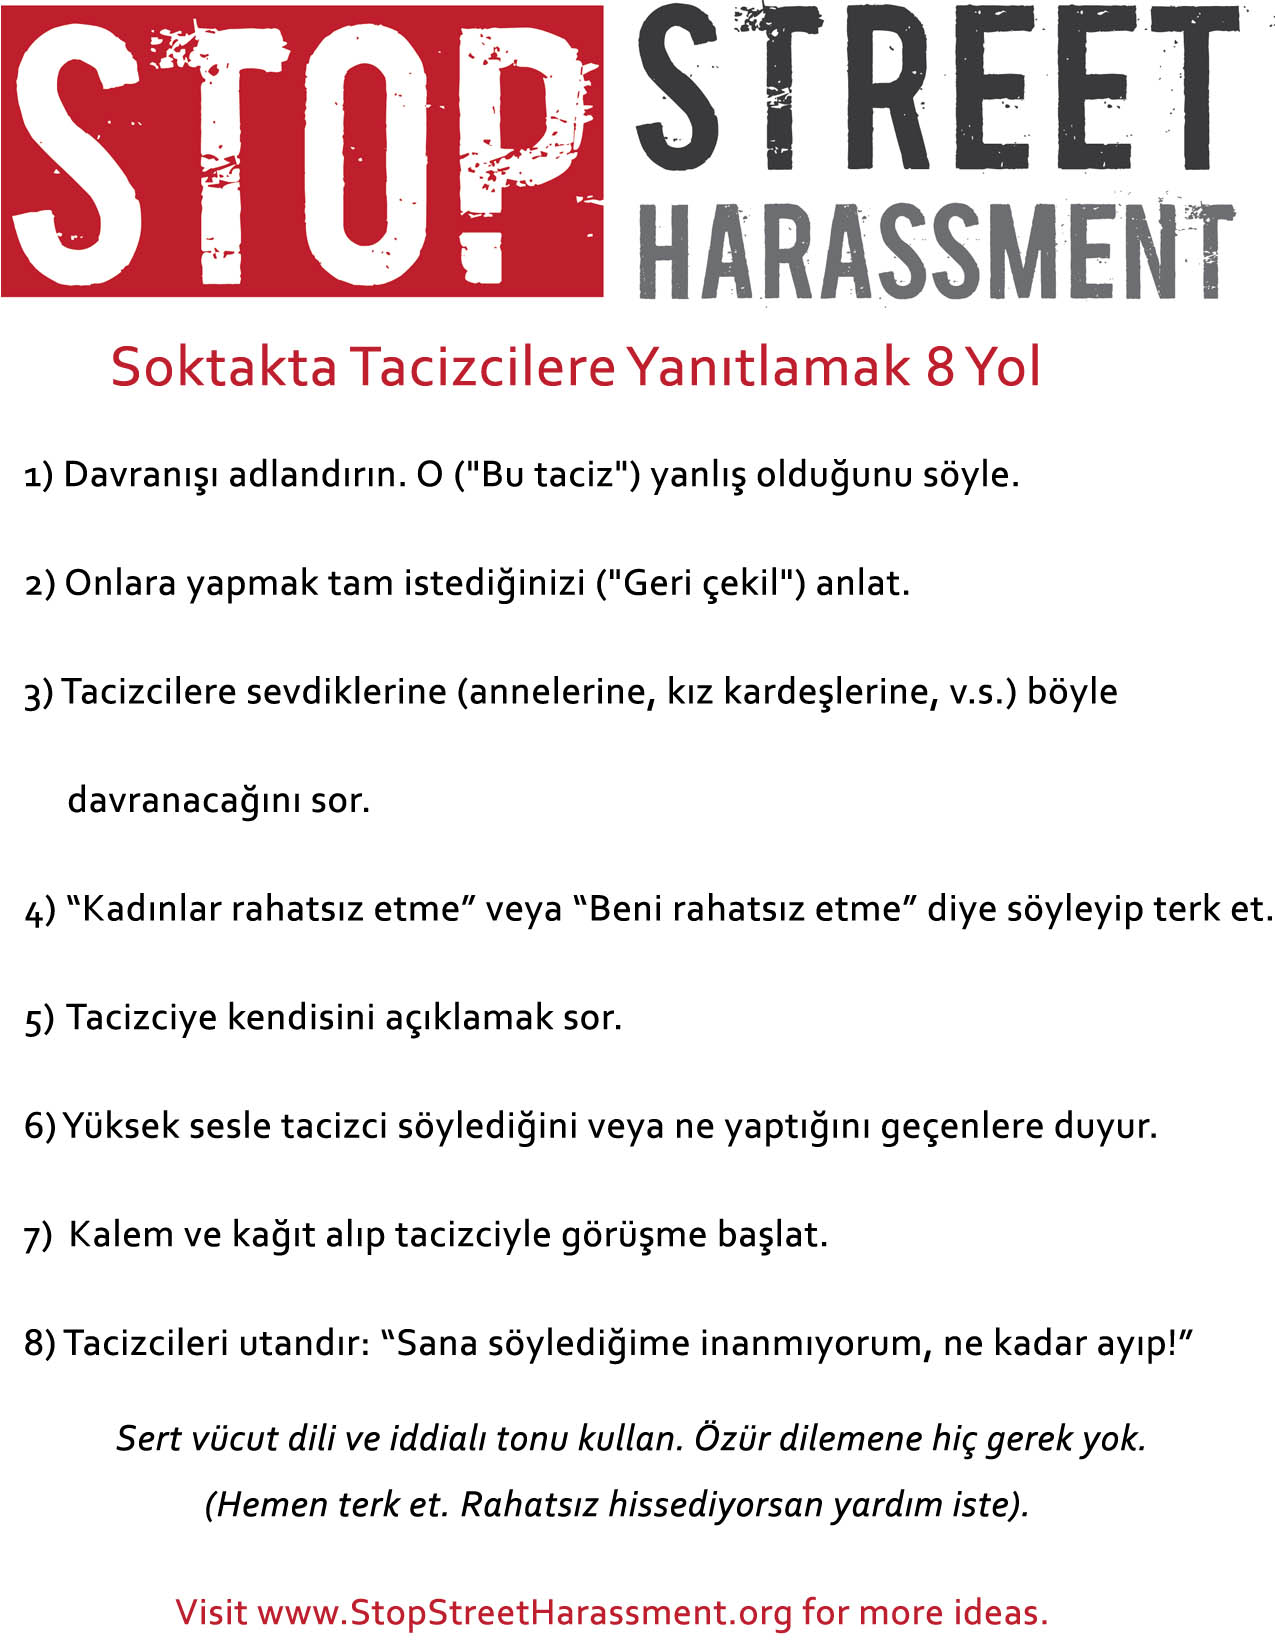 Images & Flyers - Stop Street Harassment , HD Wallpaper & Backgrounds